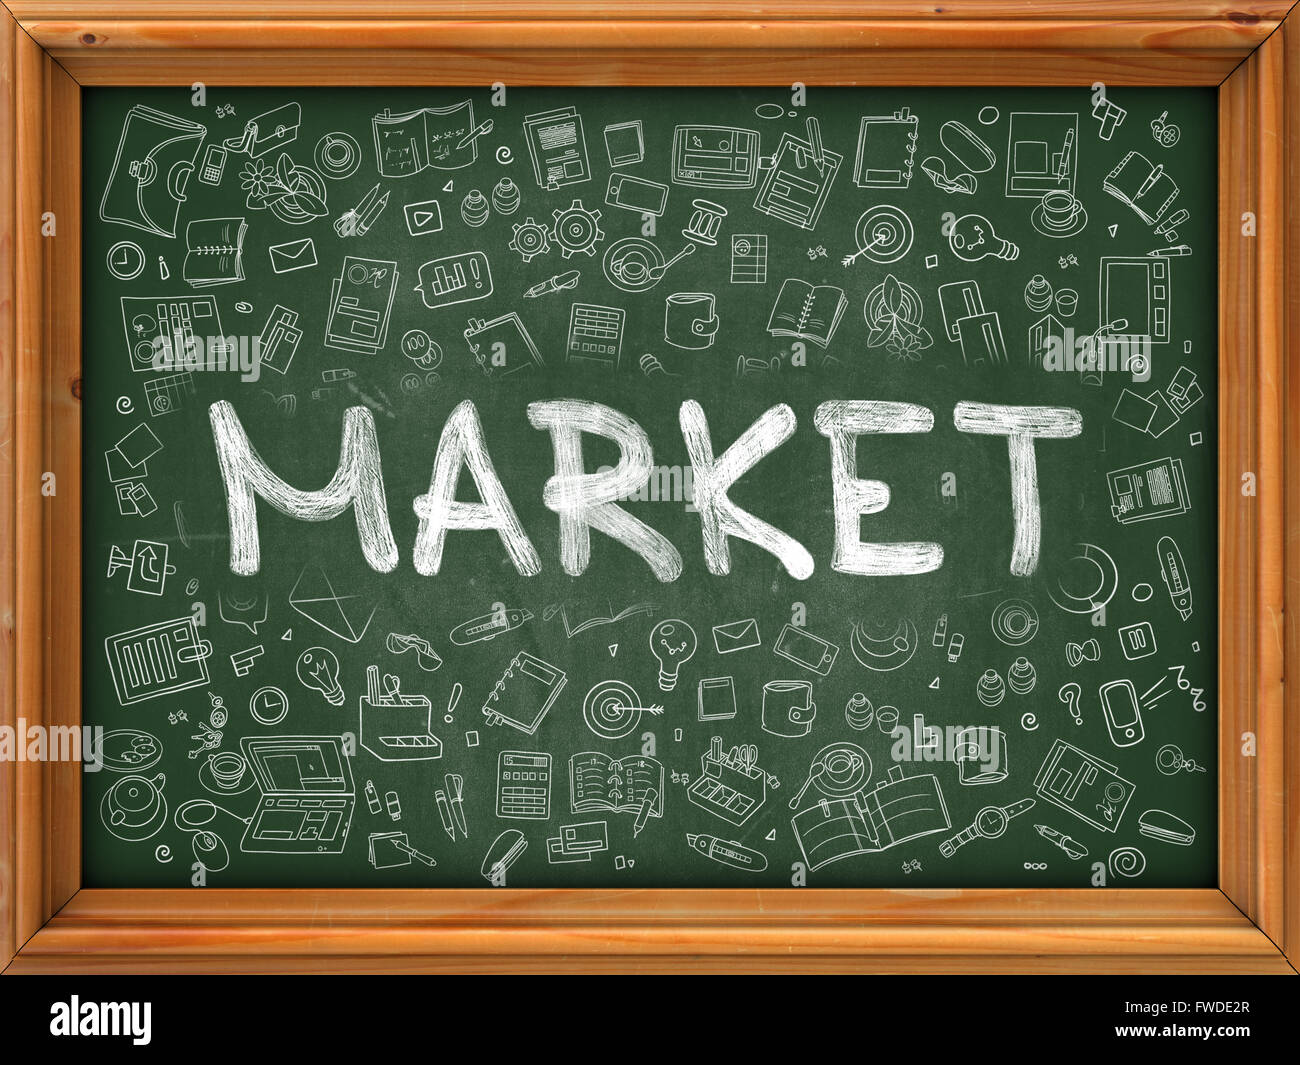 Market Concept. Doodle Icons on Chalkboard. Stock Photo